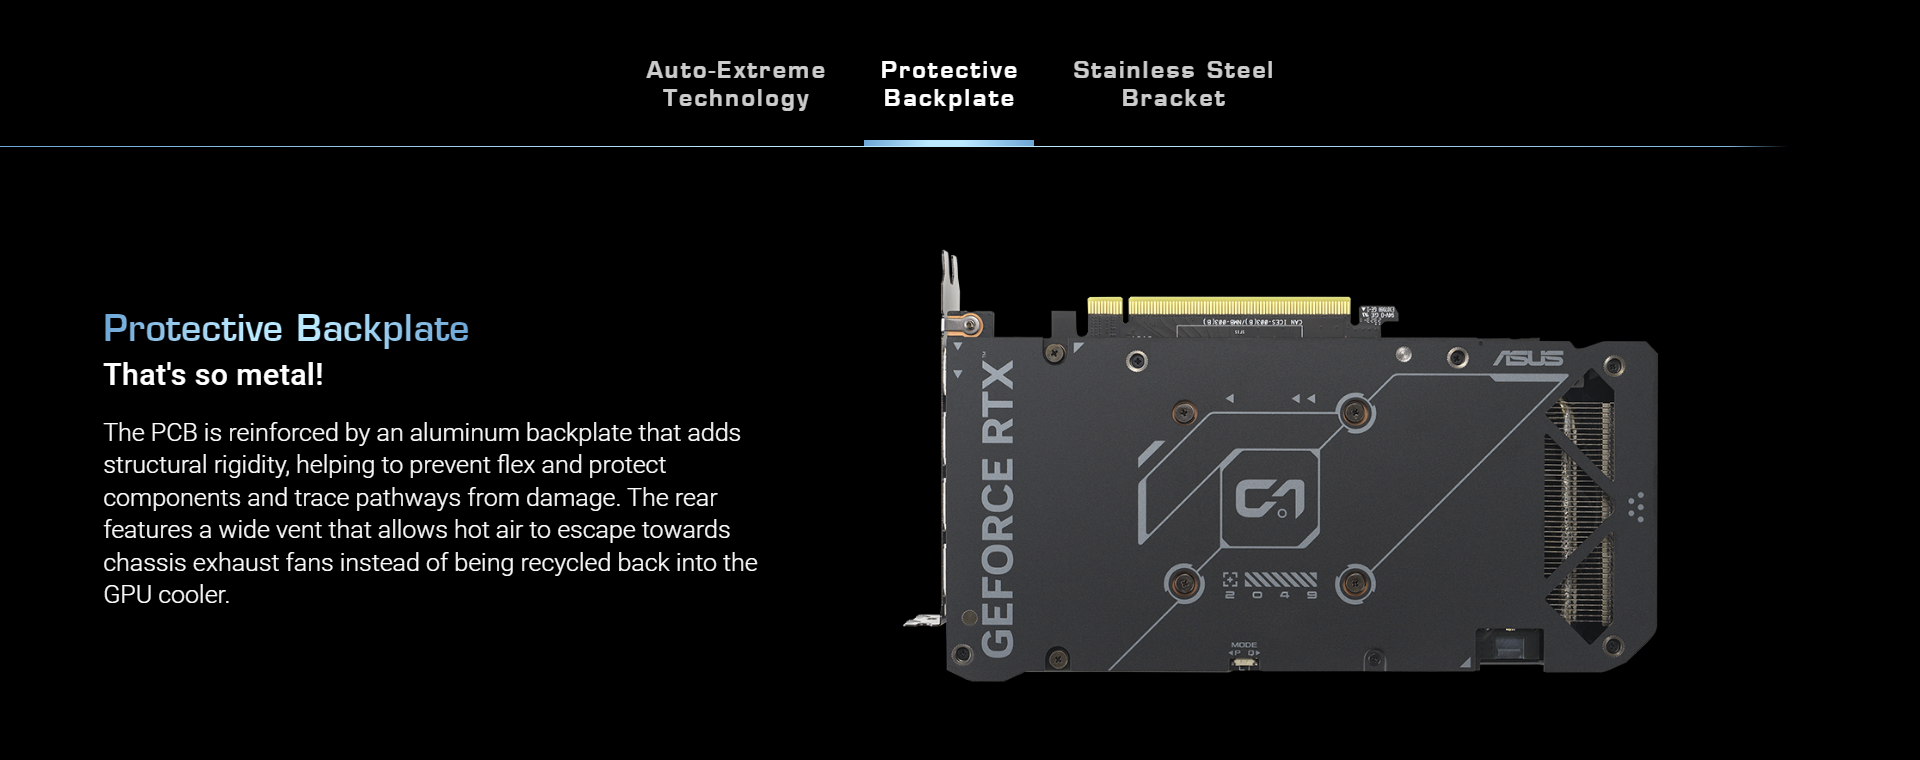 A large marketing image providing additional information about the product ASUS GeForce RTX 4060 Ti Dual OC 16GB GDDR6 - Additional alt info not provided